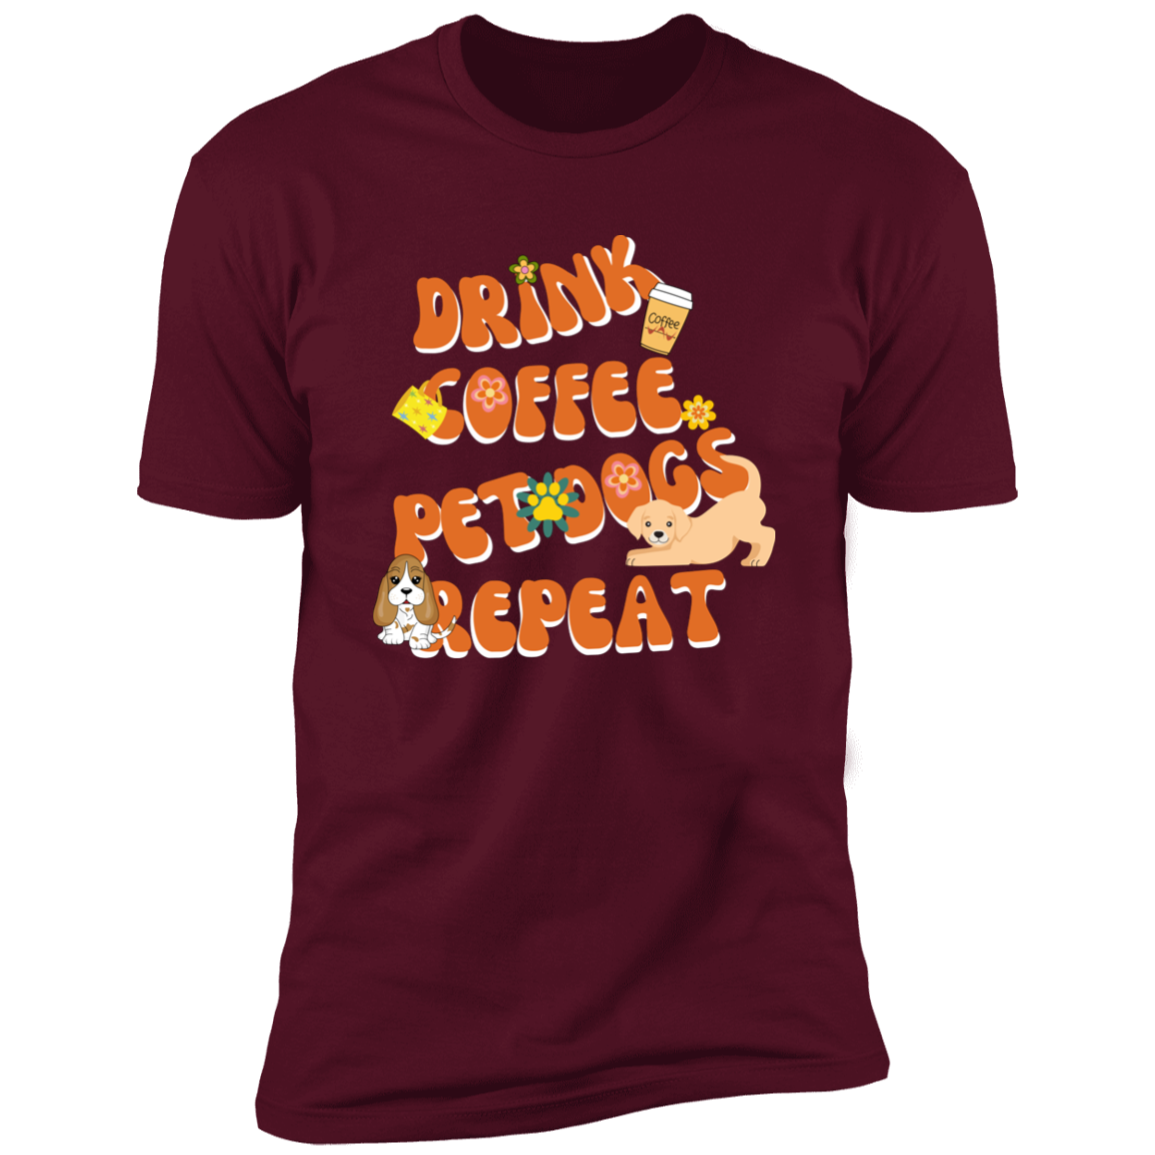 Drink Coffee Pet dogs repeat dog  Shirt, funny dog shirt for humans, dog mom and dog dad shirt, in maroon